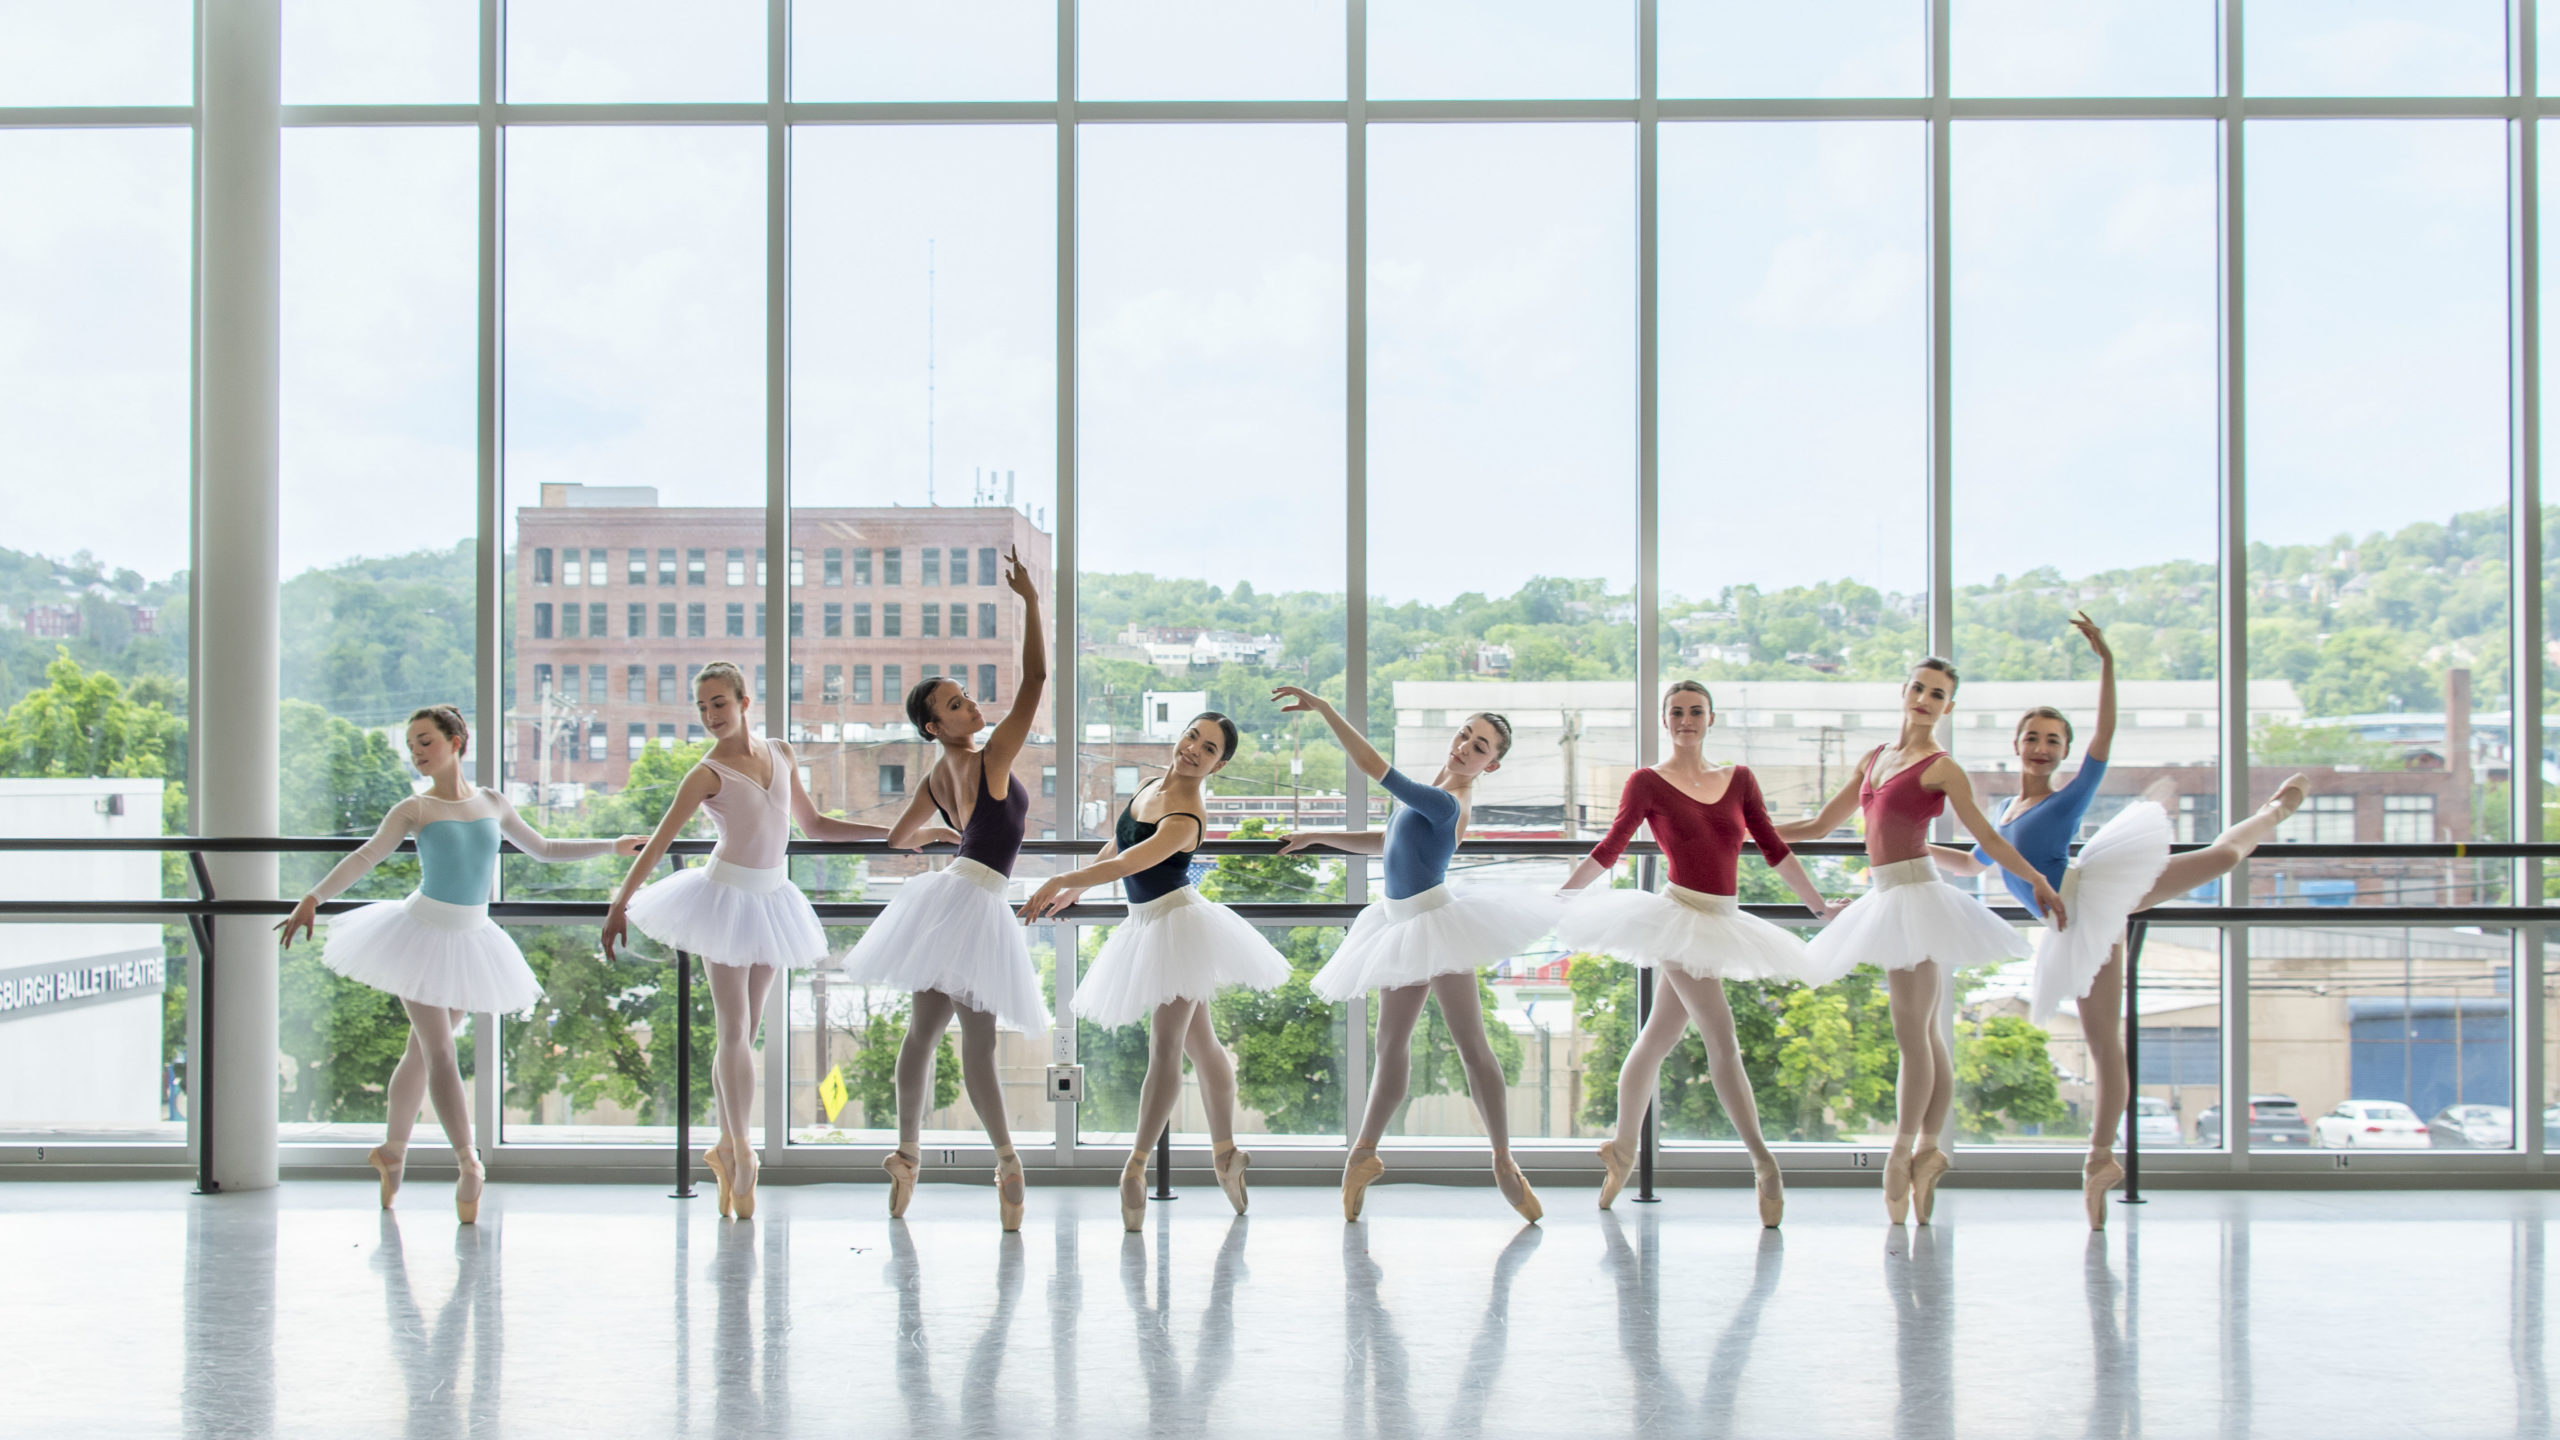 Eight young adult female ballet dancers in bright leotards, pointe shoes and white tutus pose in a line in front of a barre and a wall of windows.